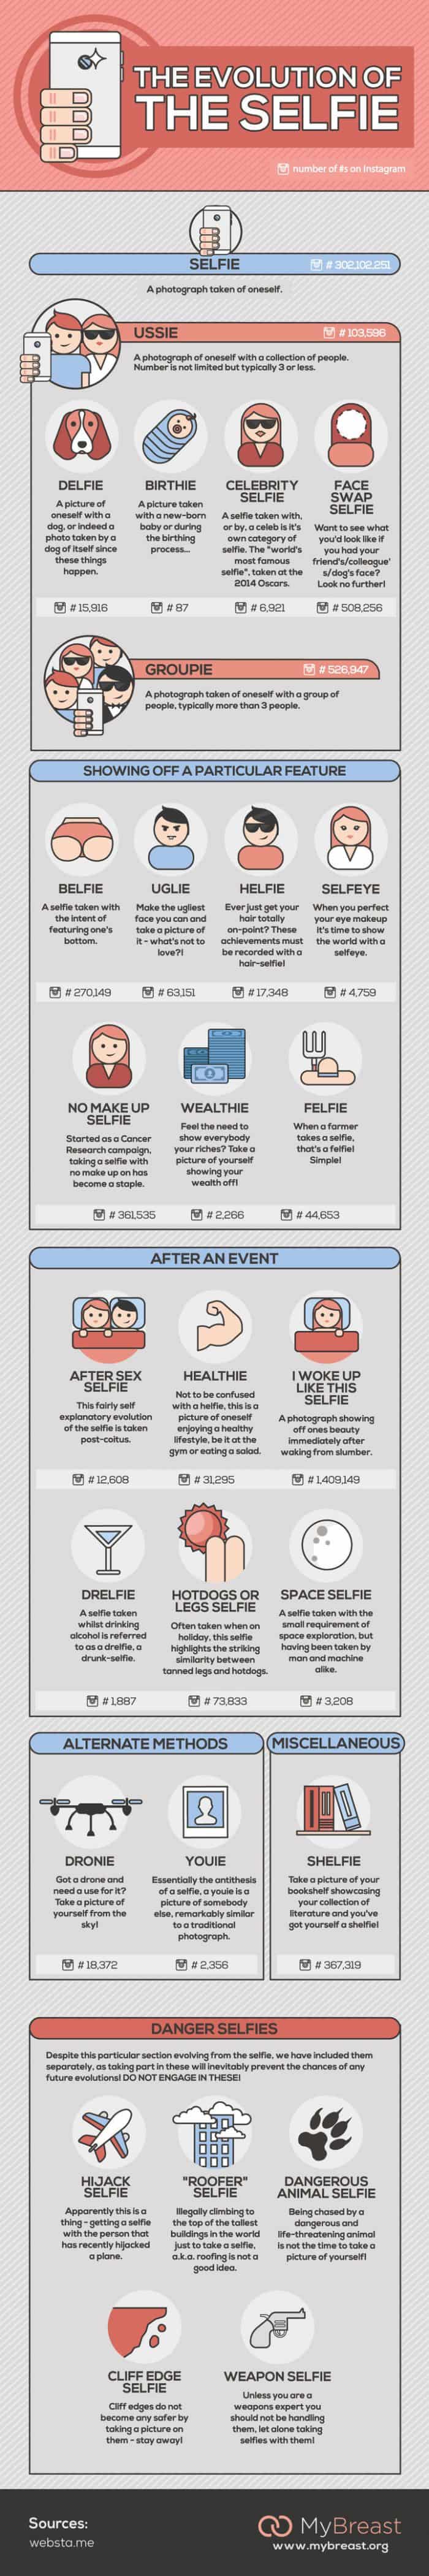 infographic describes different types of selfies